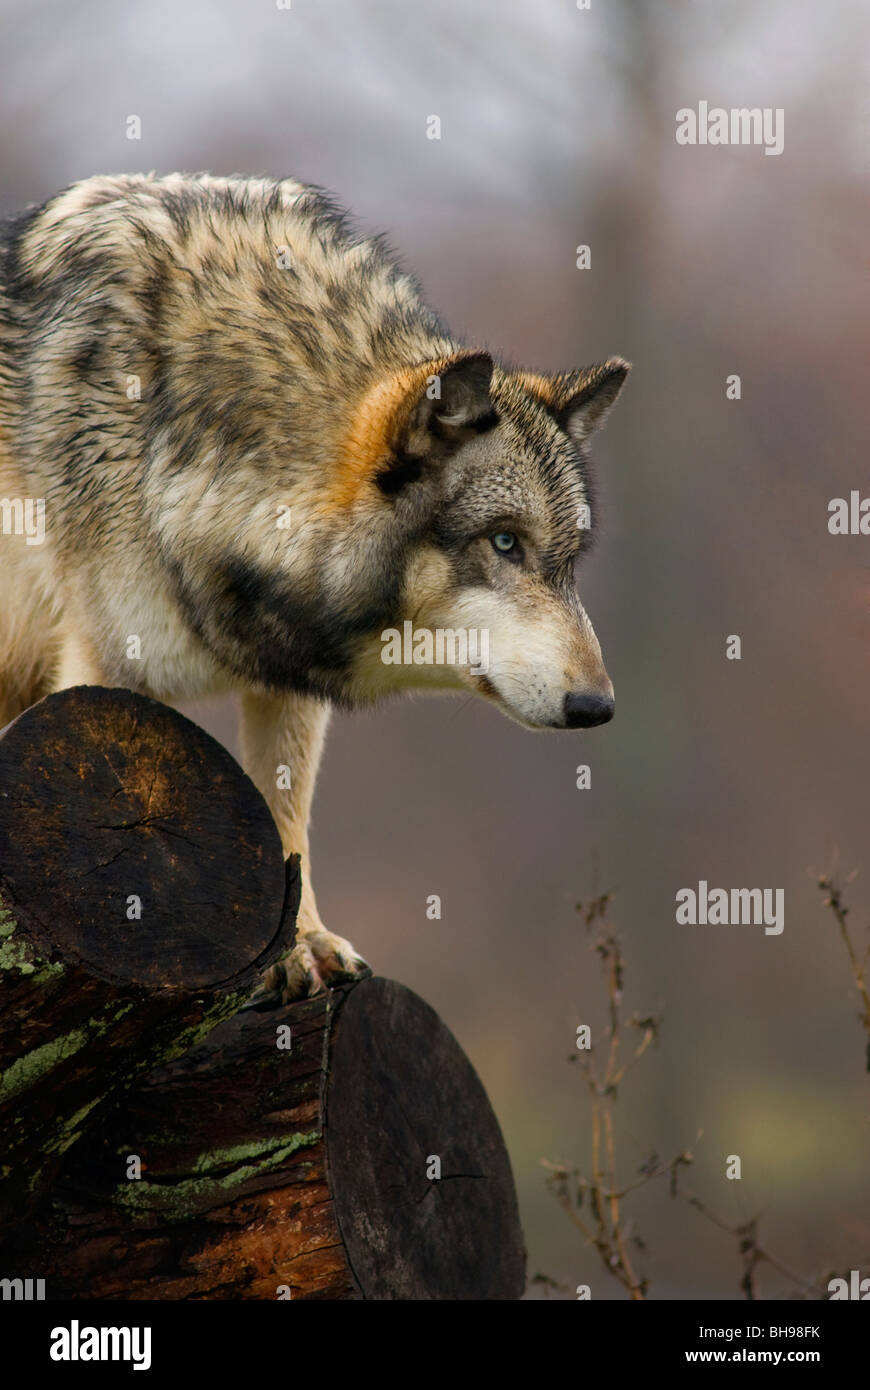 This Wolf is ready to pounce.  His lowered head and forward lean is a menacing pose to behold. Stock Photo